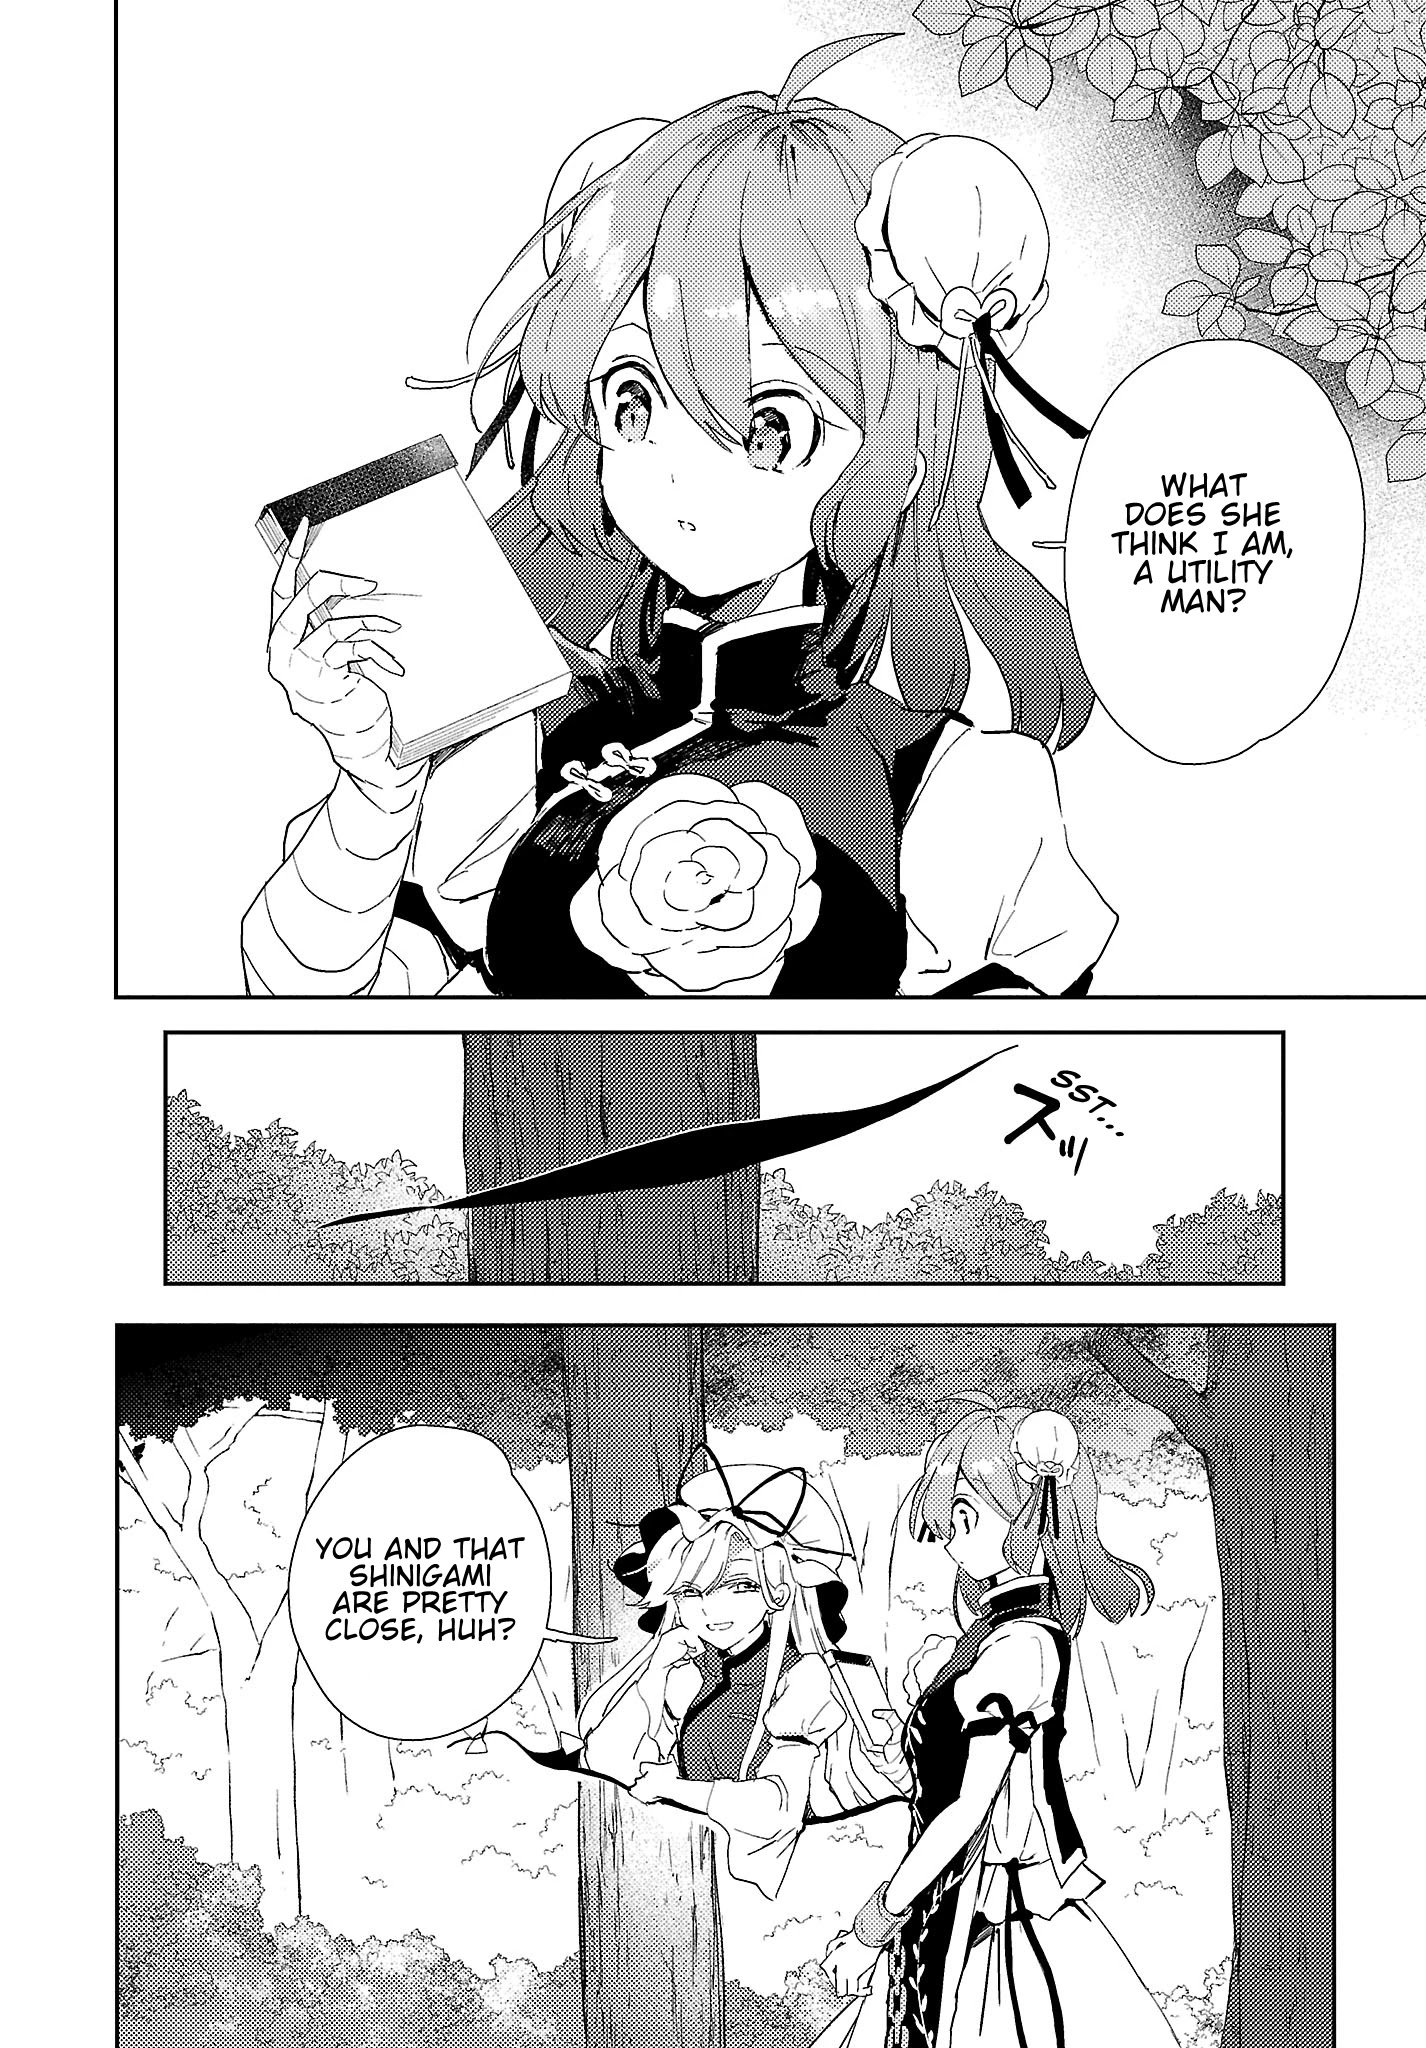 The Shinigami's Rowing Her Boat As Usual - Touhou Chapter 6 #20